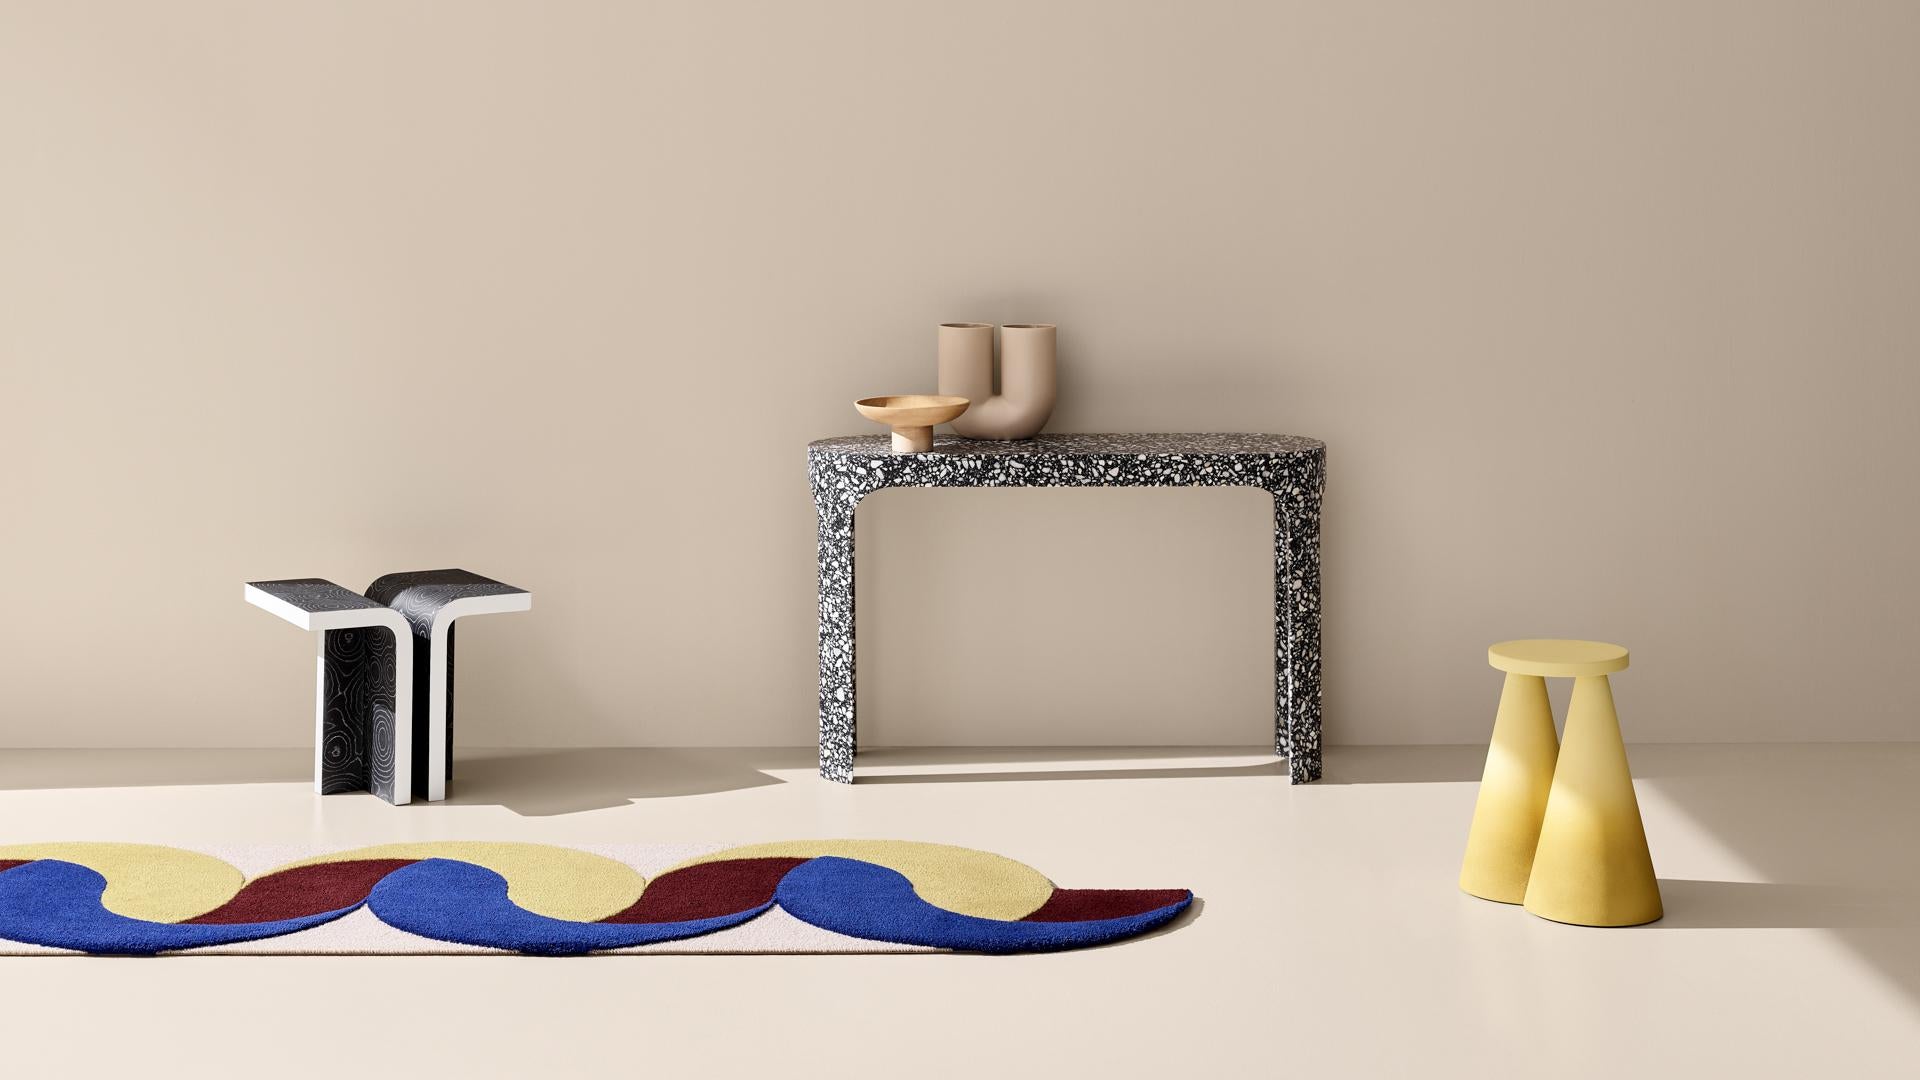 Isola side table is completely made in ceramic using high temperature furnace, to make the material stronger.
The large base makes the object stable as well as unique on its design.
Each piece is then finished by playing with the contrast between